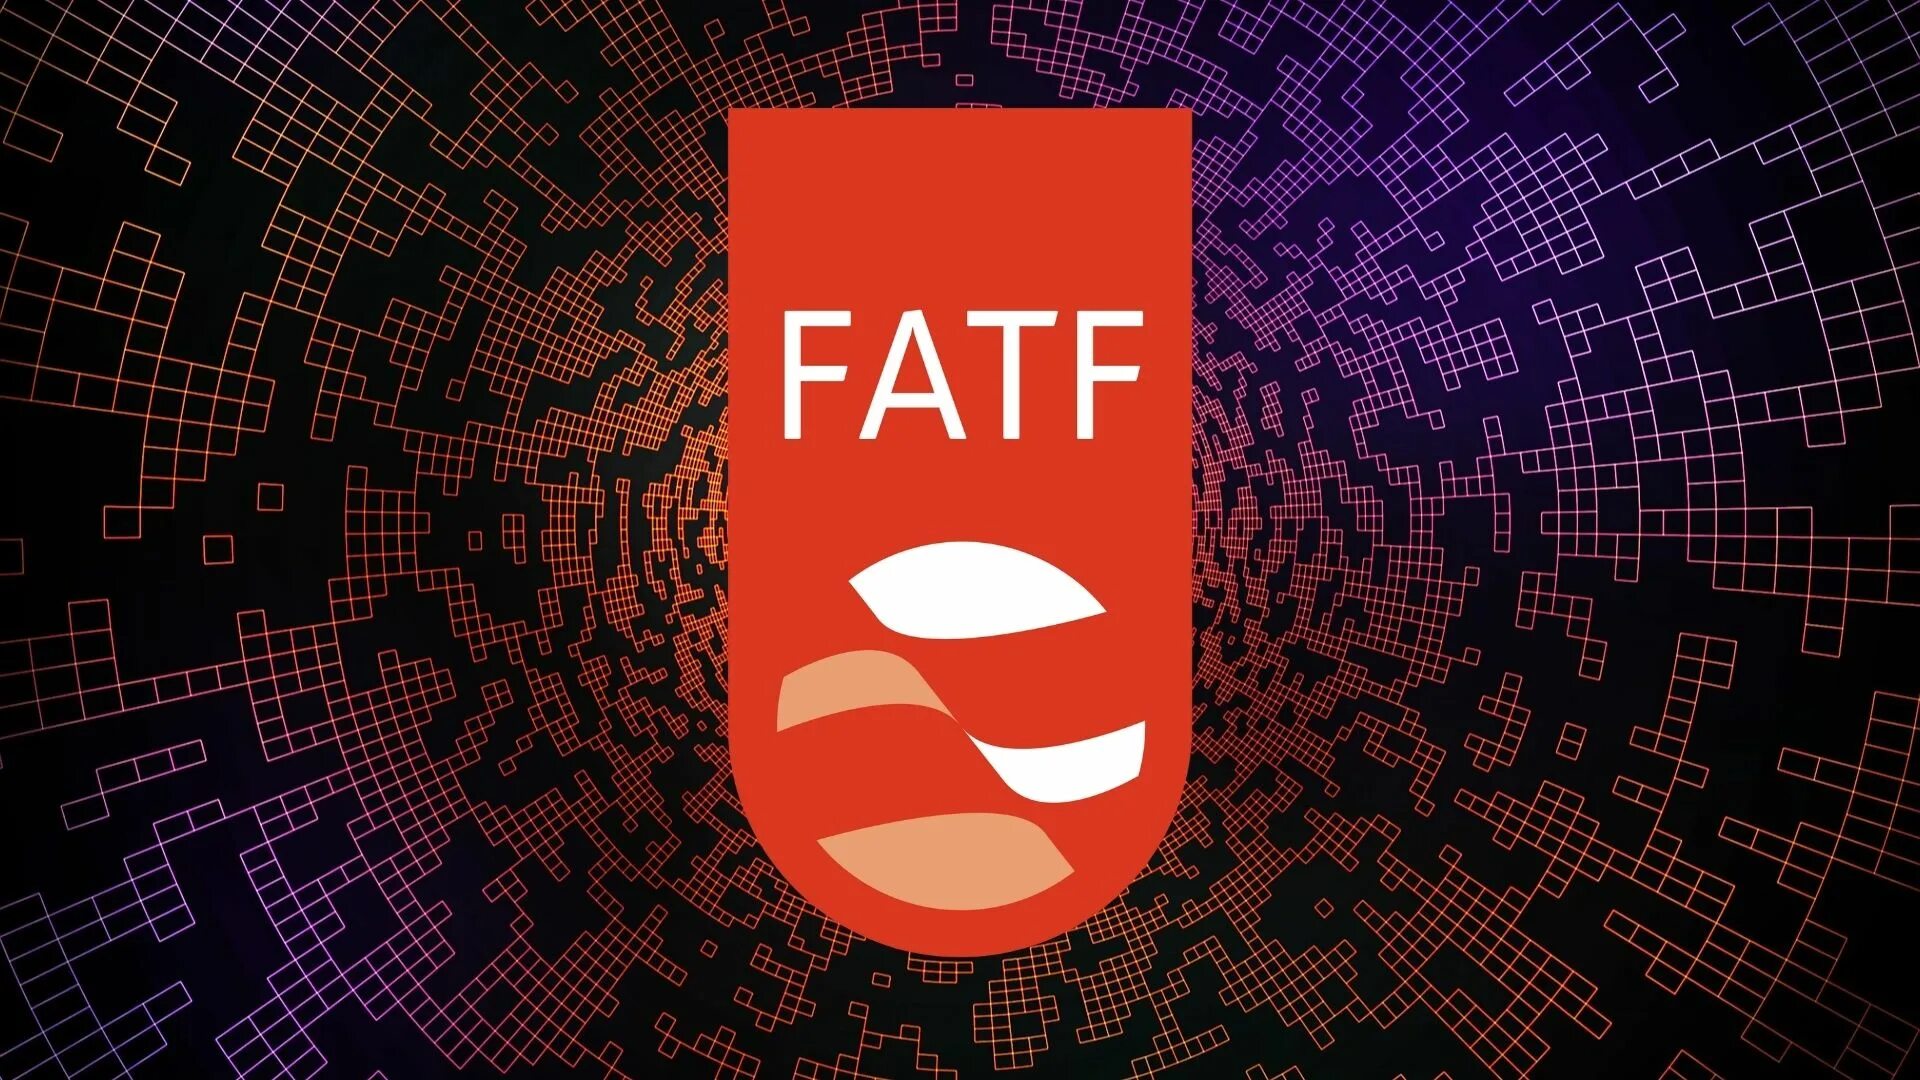 Financial Action task Force, FATF. Фатф ( Financial Action task Force - FATF ) Россия. Фатф логотип. Россия и фатф. Отмыванием денег фатф